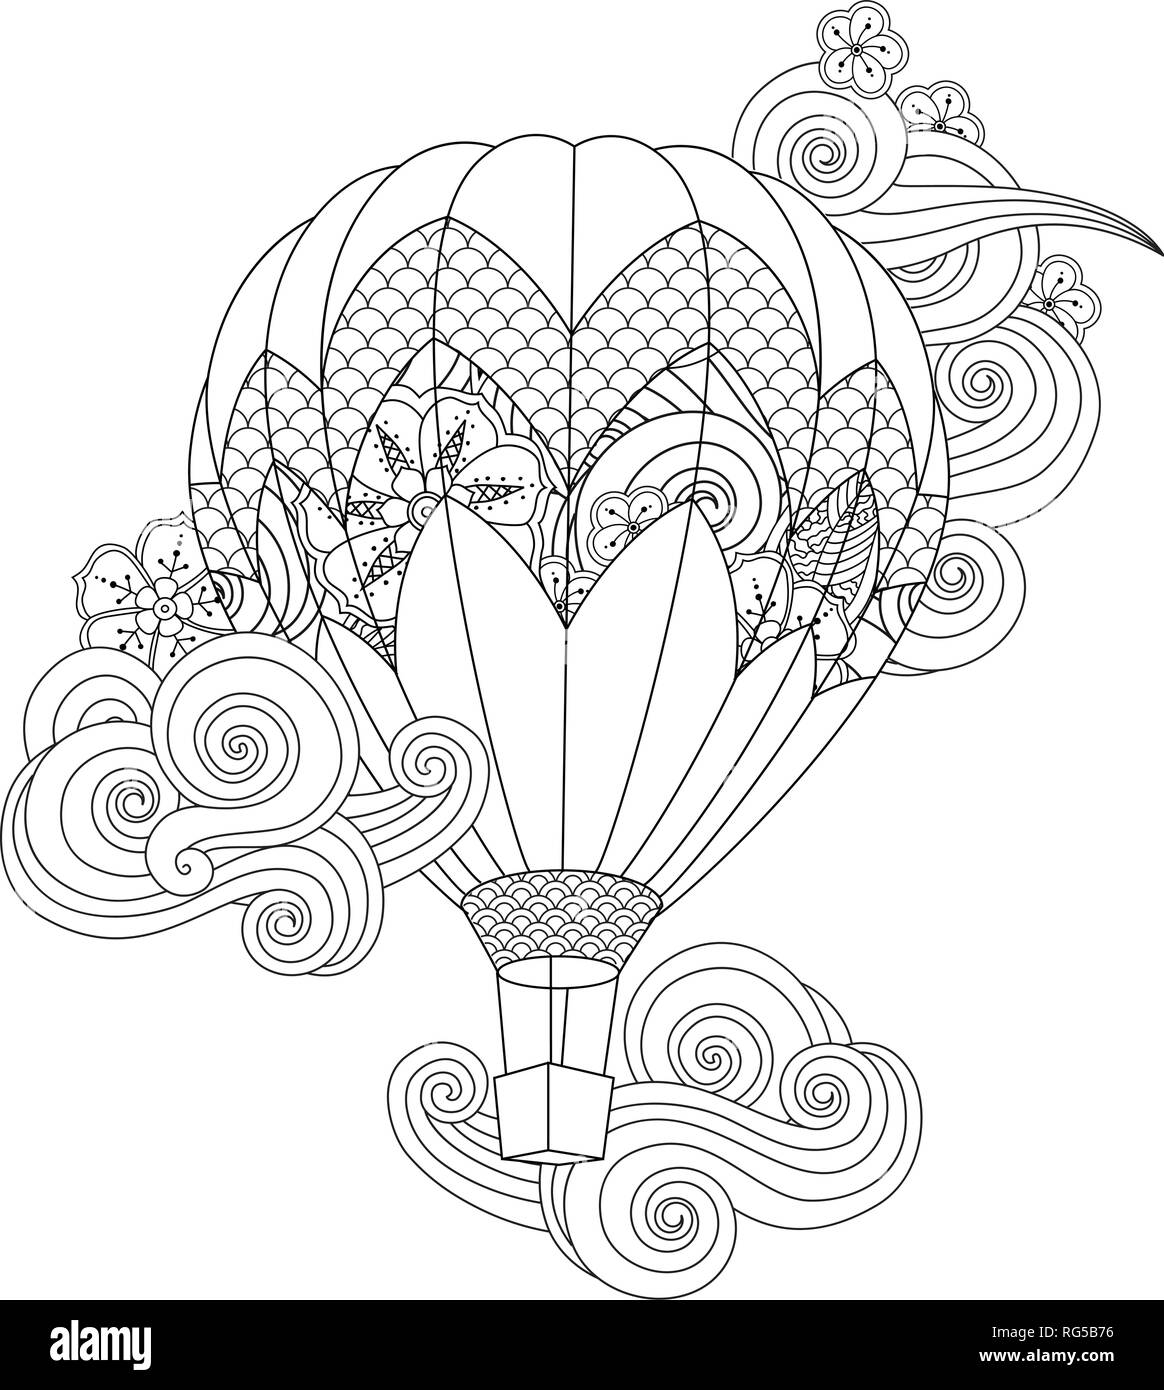 hot air balloon in zentangle inspired doodle style isolated on white. Coloring book page for adult and older children. Stock Vector